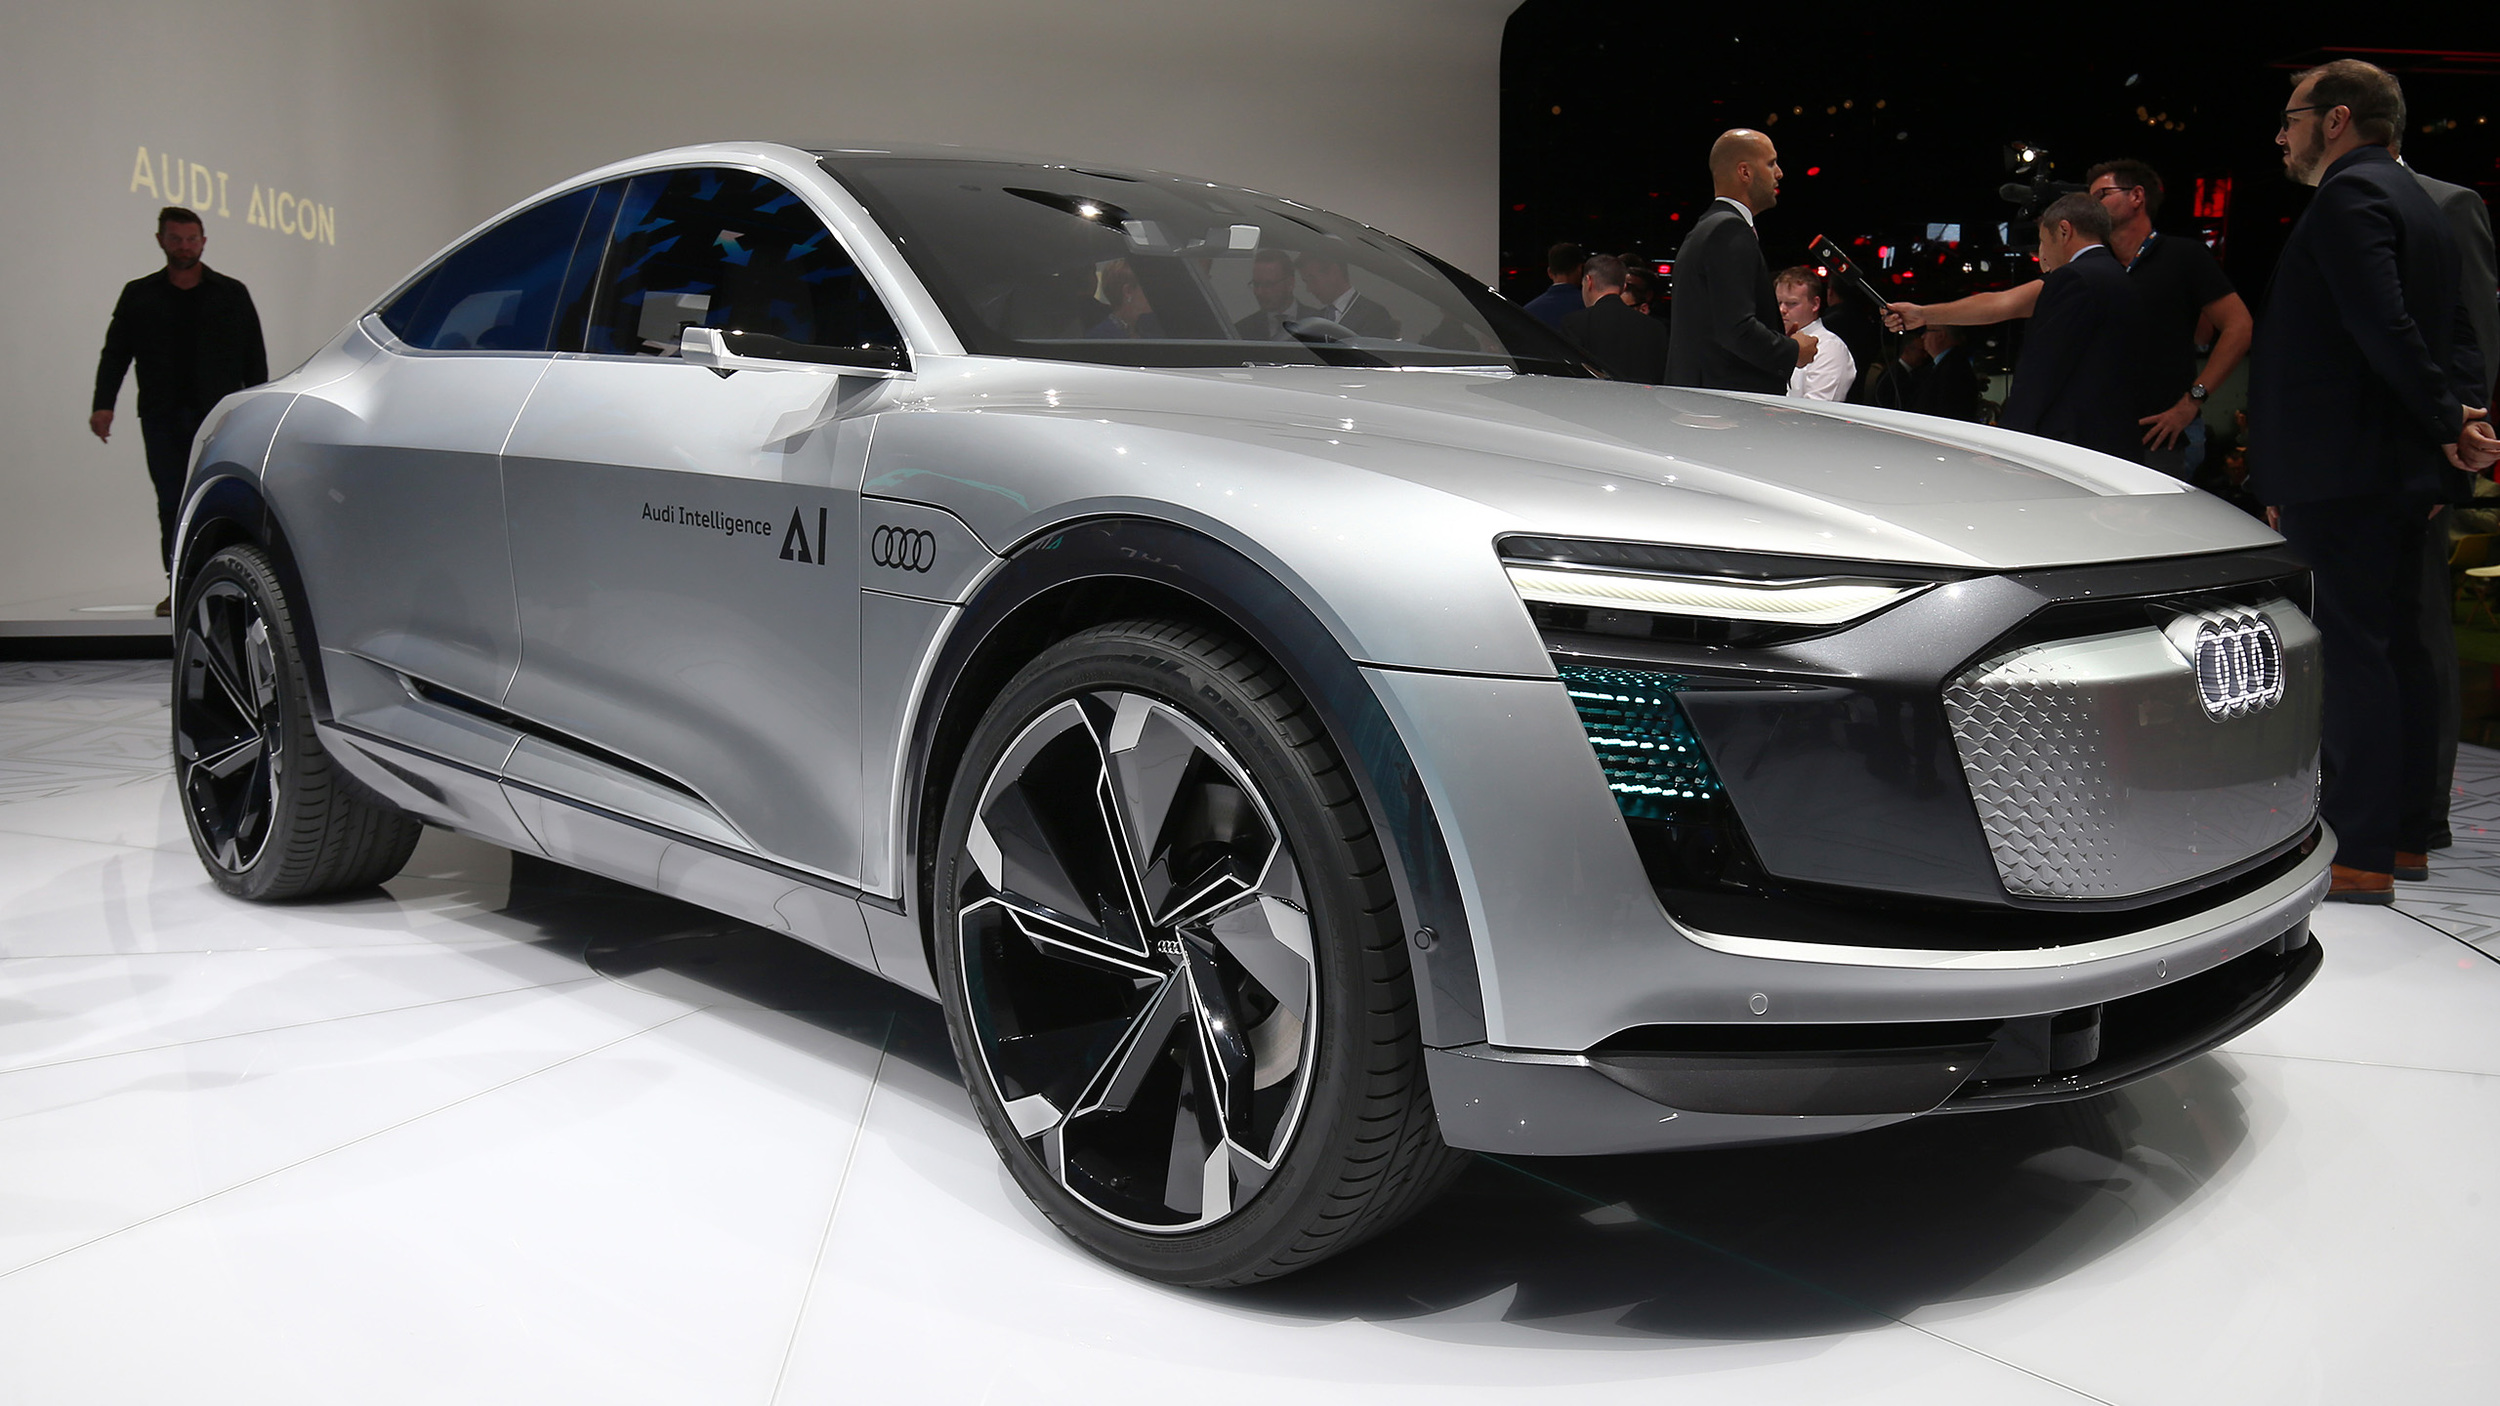 Audi’s new Elaine concept car can empathize with you - Autoblog